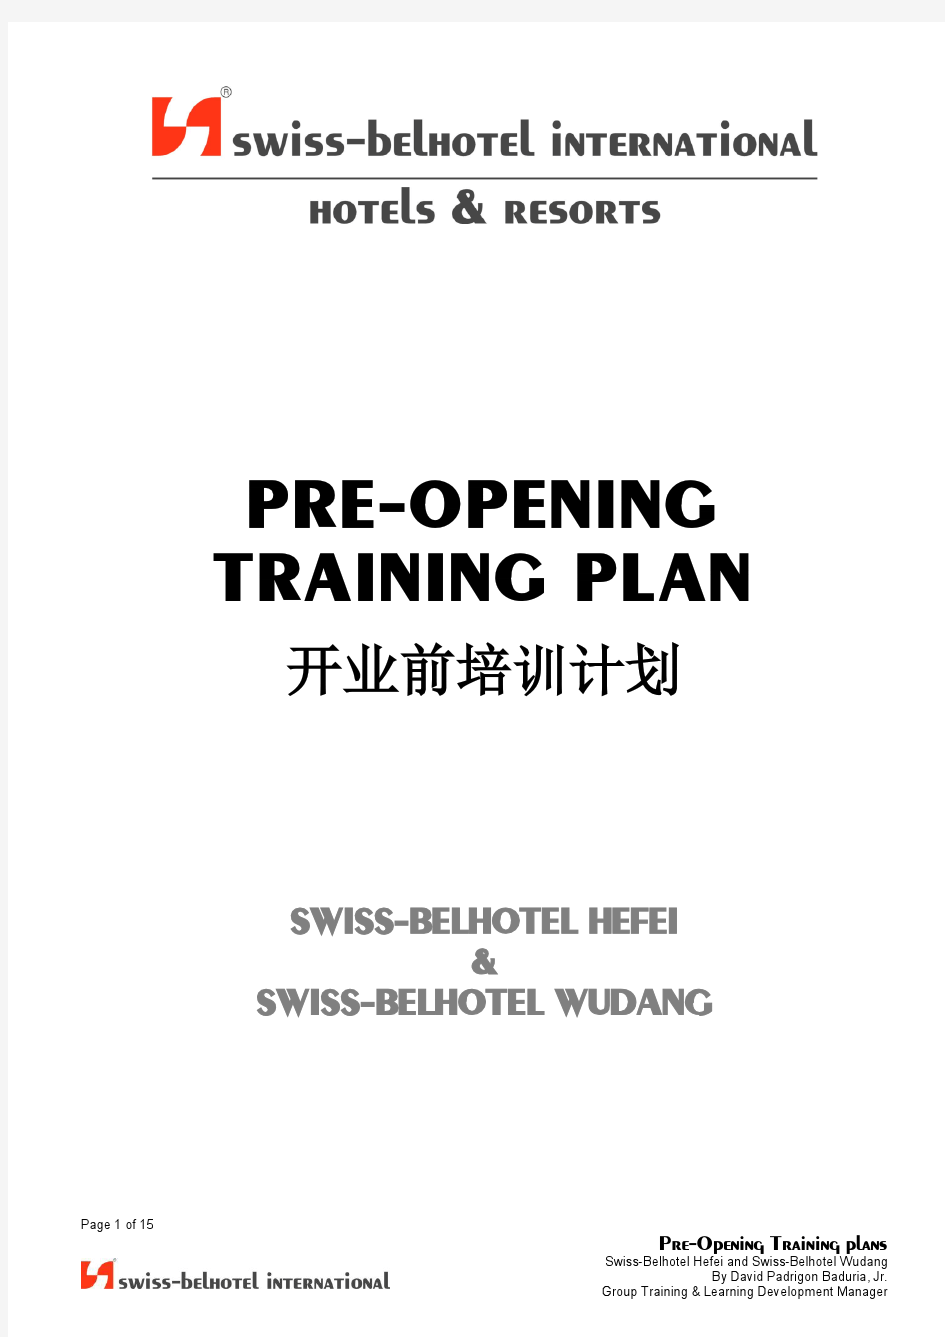 HR & Training Plan - SBHF & SBWD - with Chinese